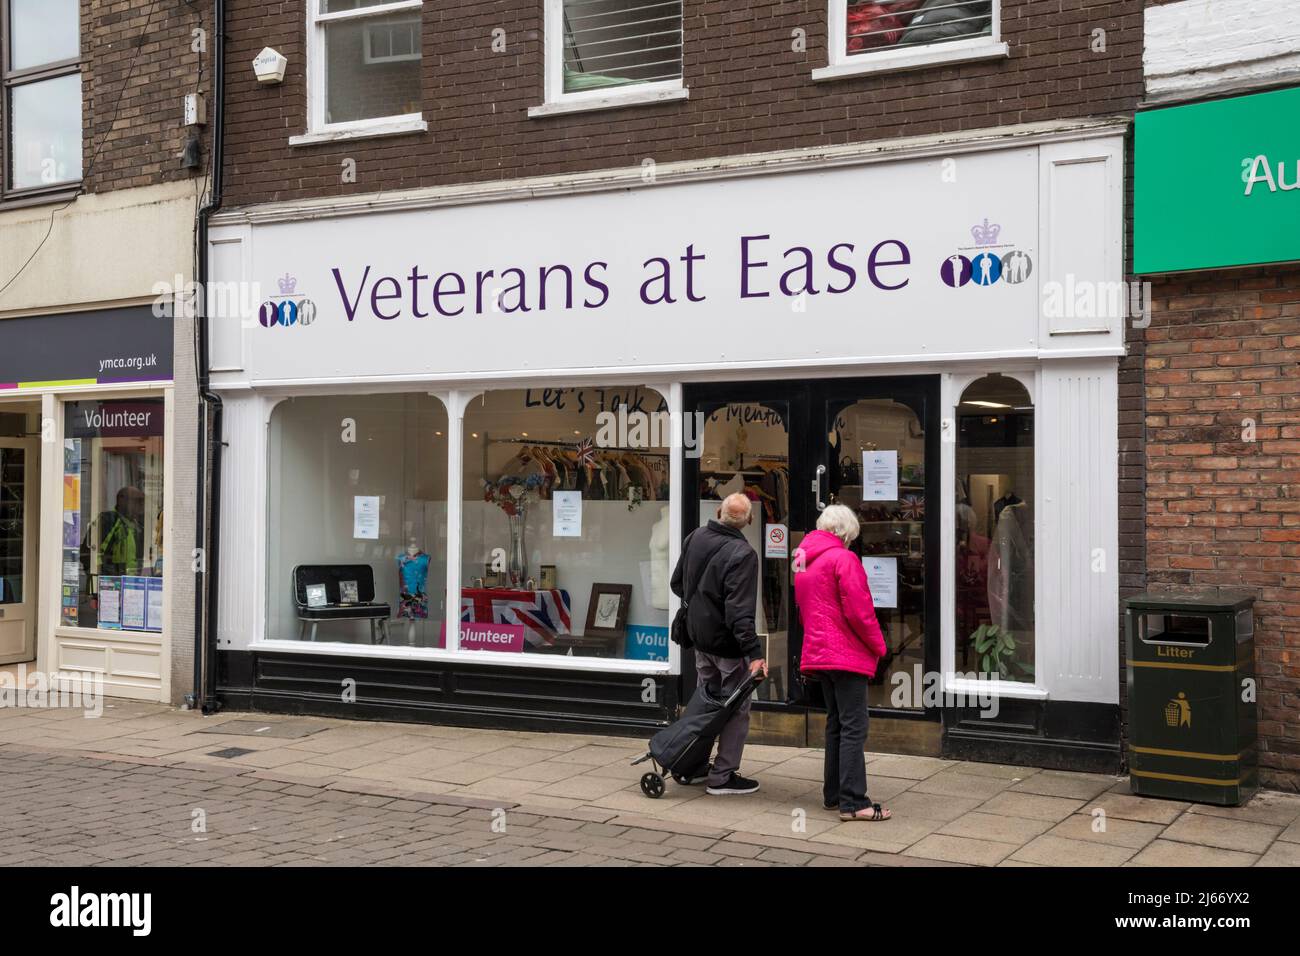 Veterans at Ease charity shop. Military Mental Health Charity supporting those with Post-Traumatic Stress Disorder, PTSD, or similar issues. Stock Photo